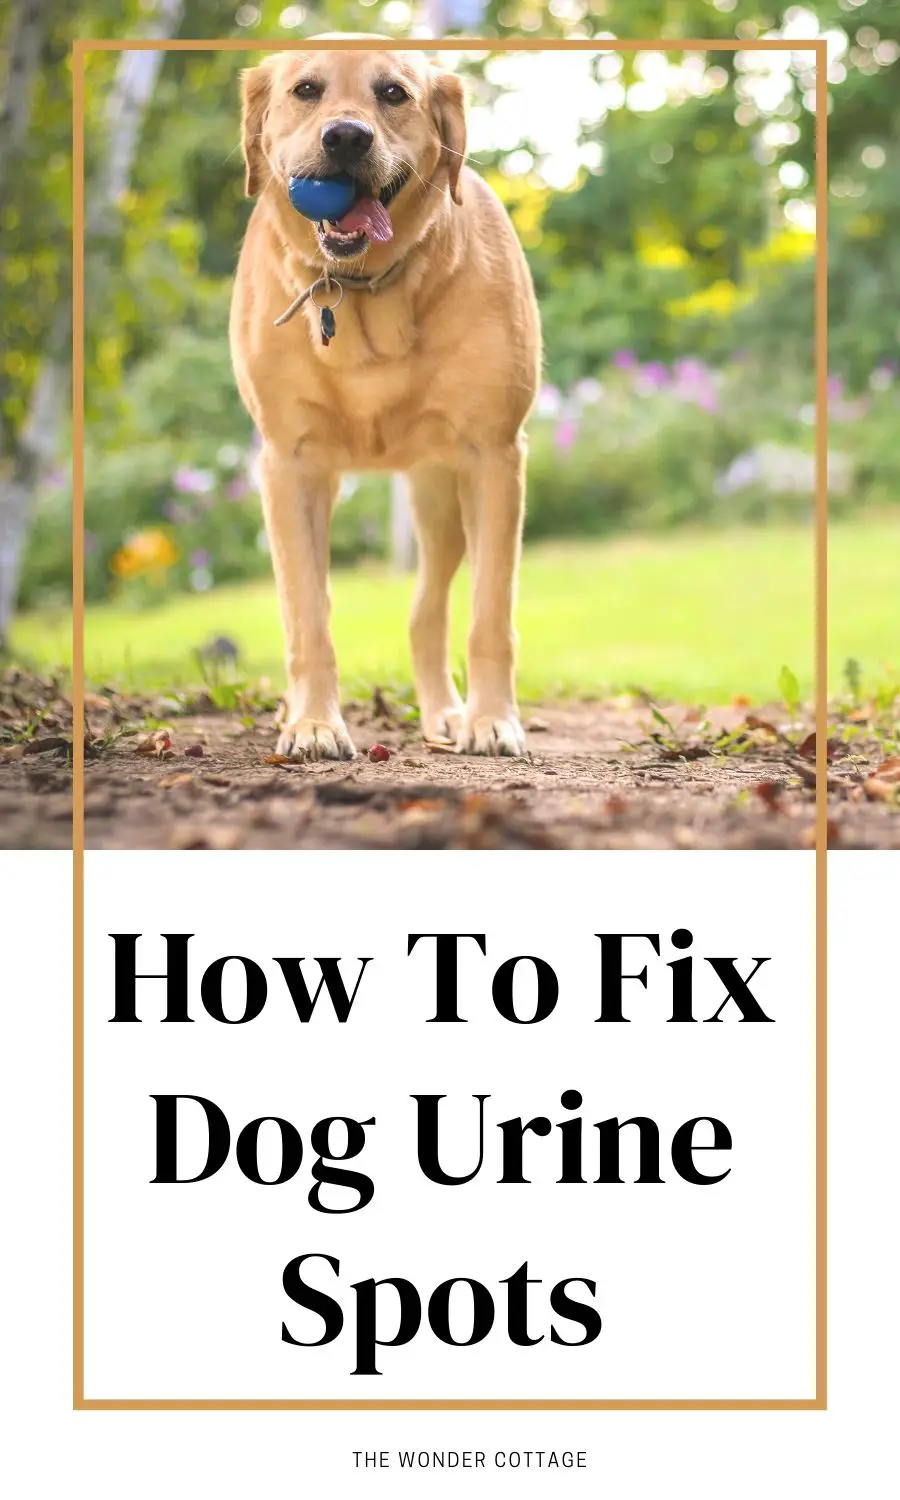 how to fix dog urine spots on lawn